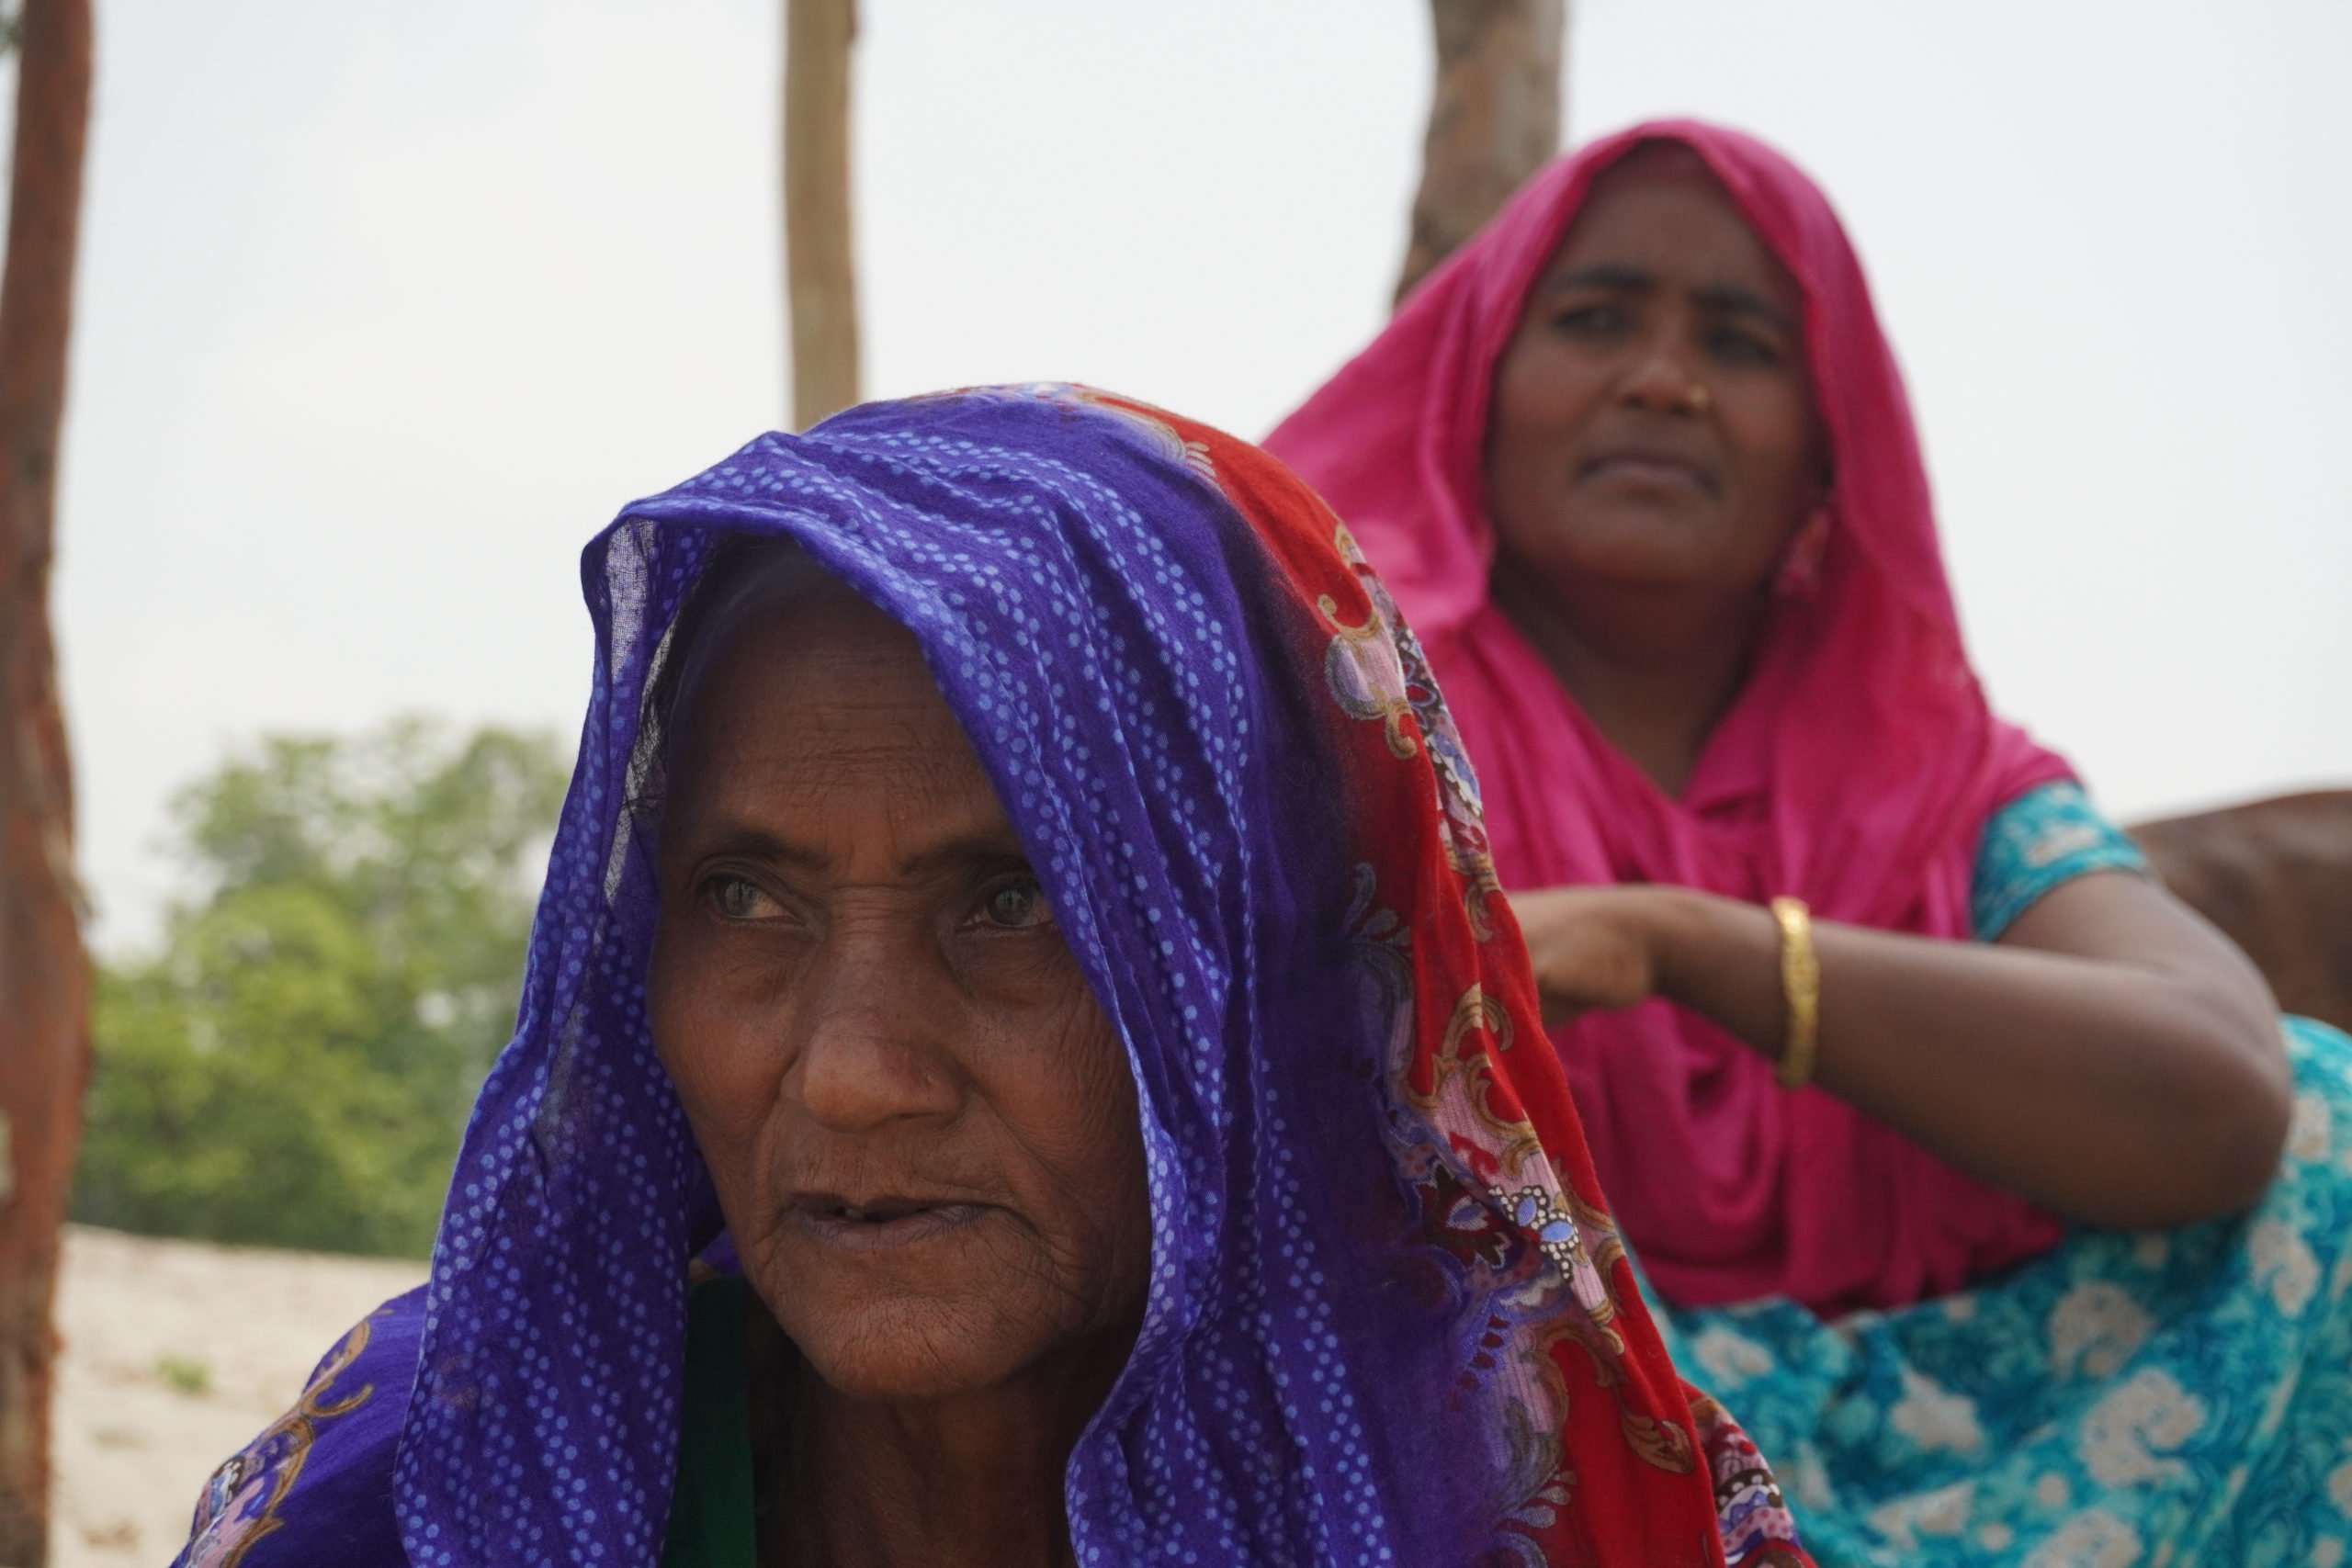 Sukhi Begum with her 50-year-old daughter Bani Begum in the background at her home in Pakuar Char, Jamalpur, Bangladesh